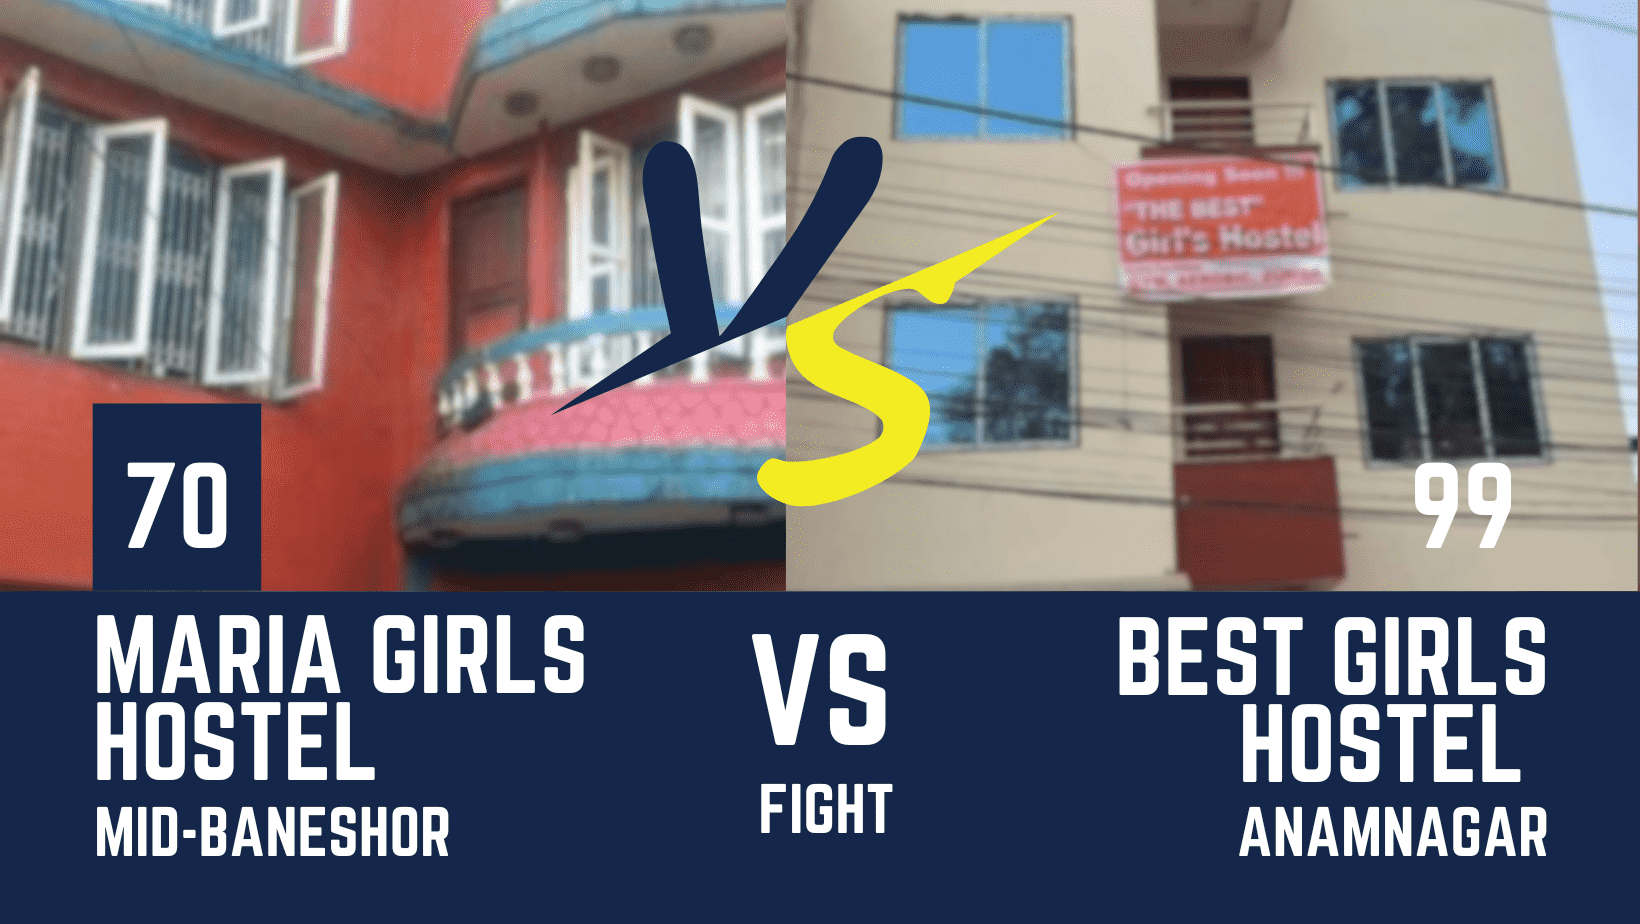 Comparing the Best Girls Hostel and Maria Girls Hostel: Finding the Ideal Stay for Students in Kathmandu